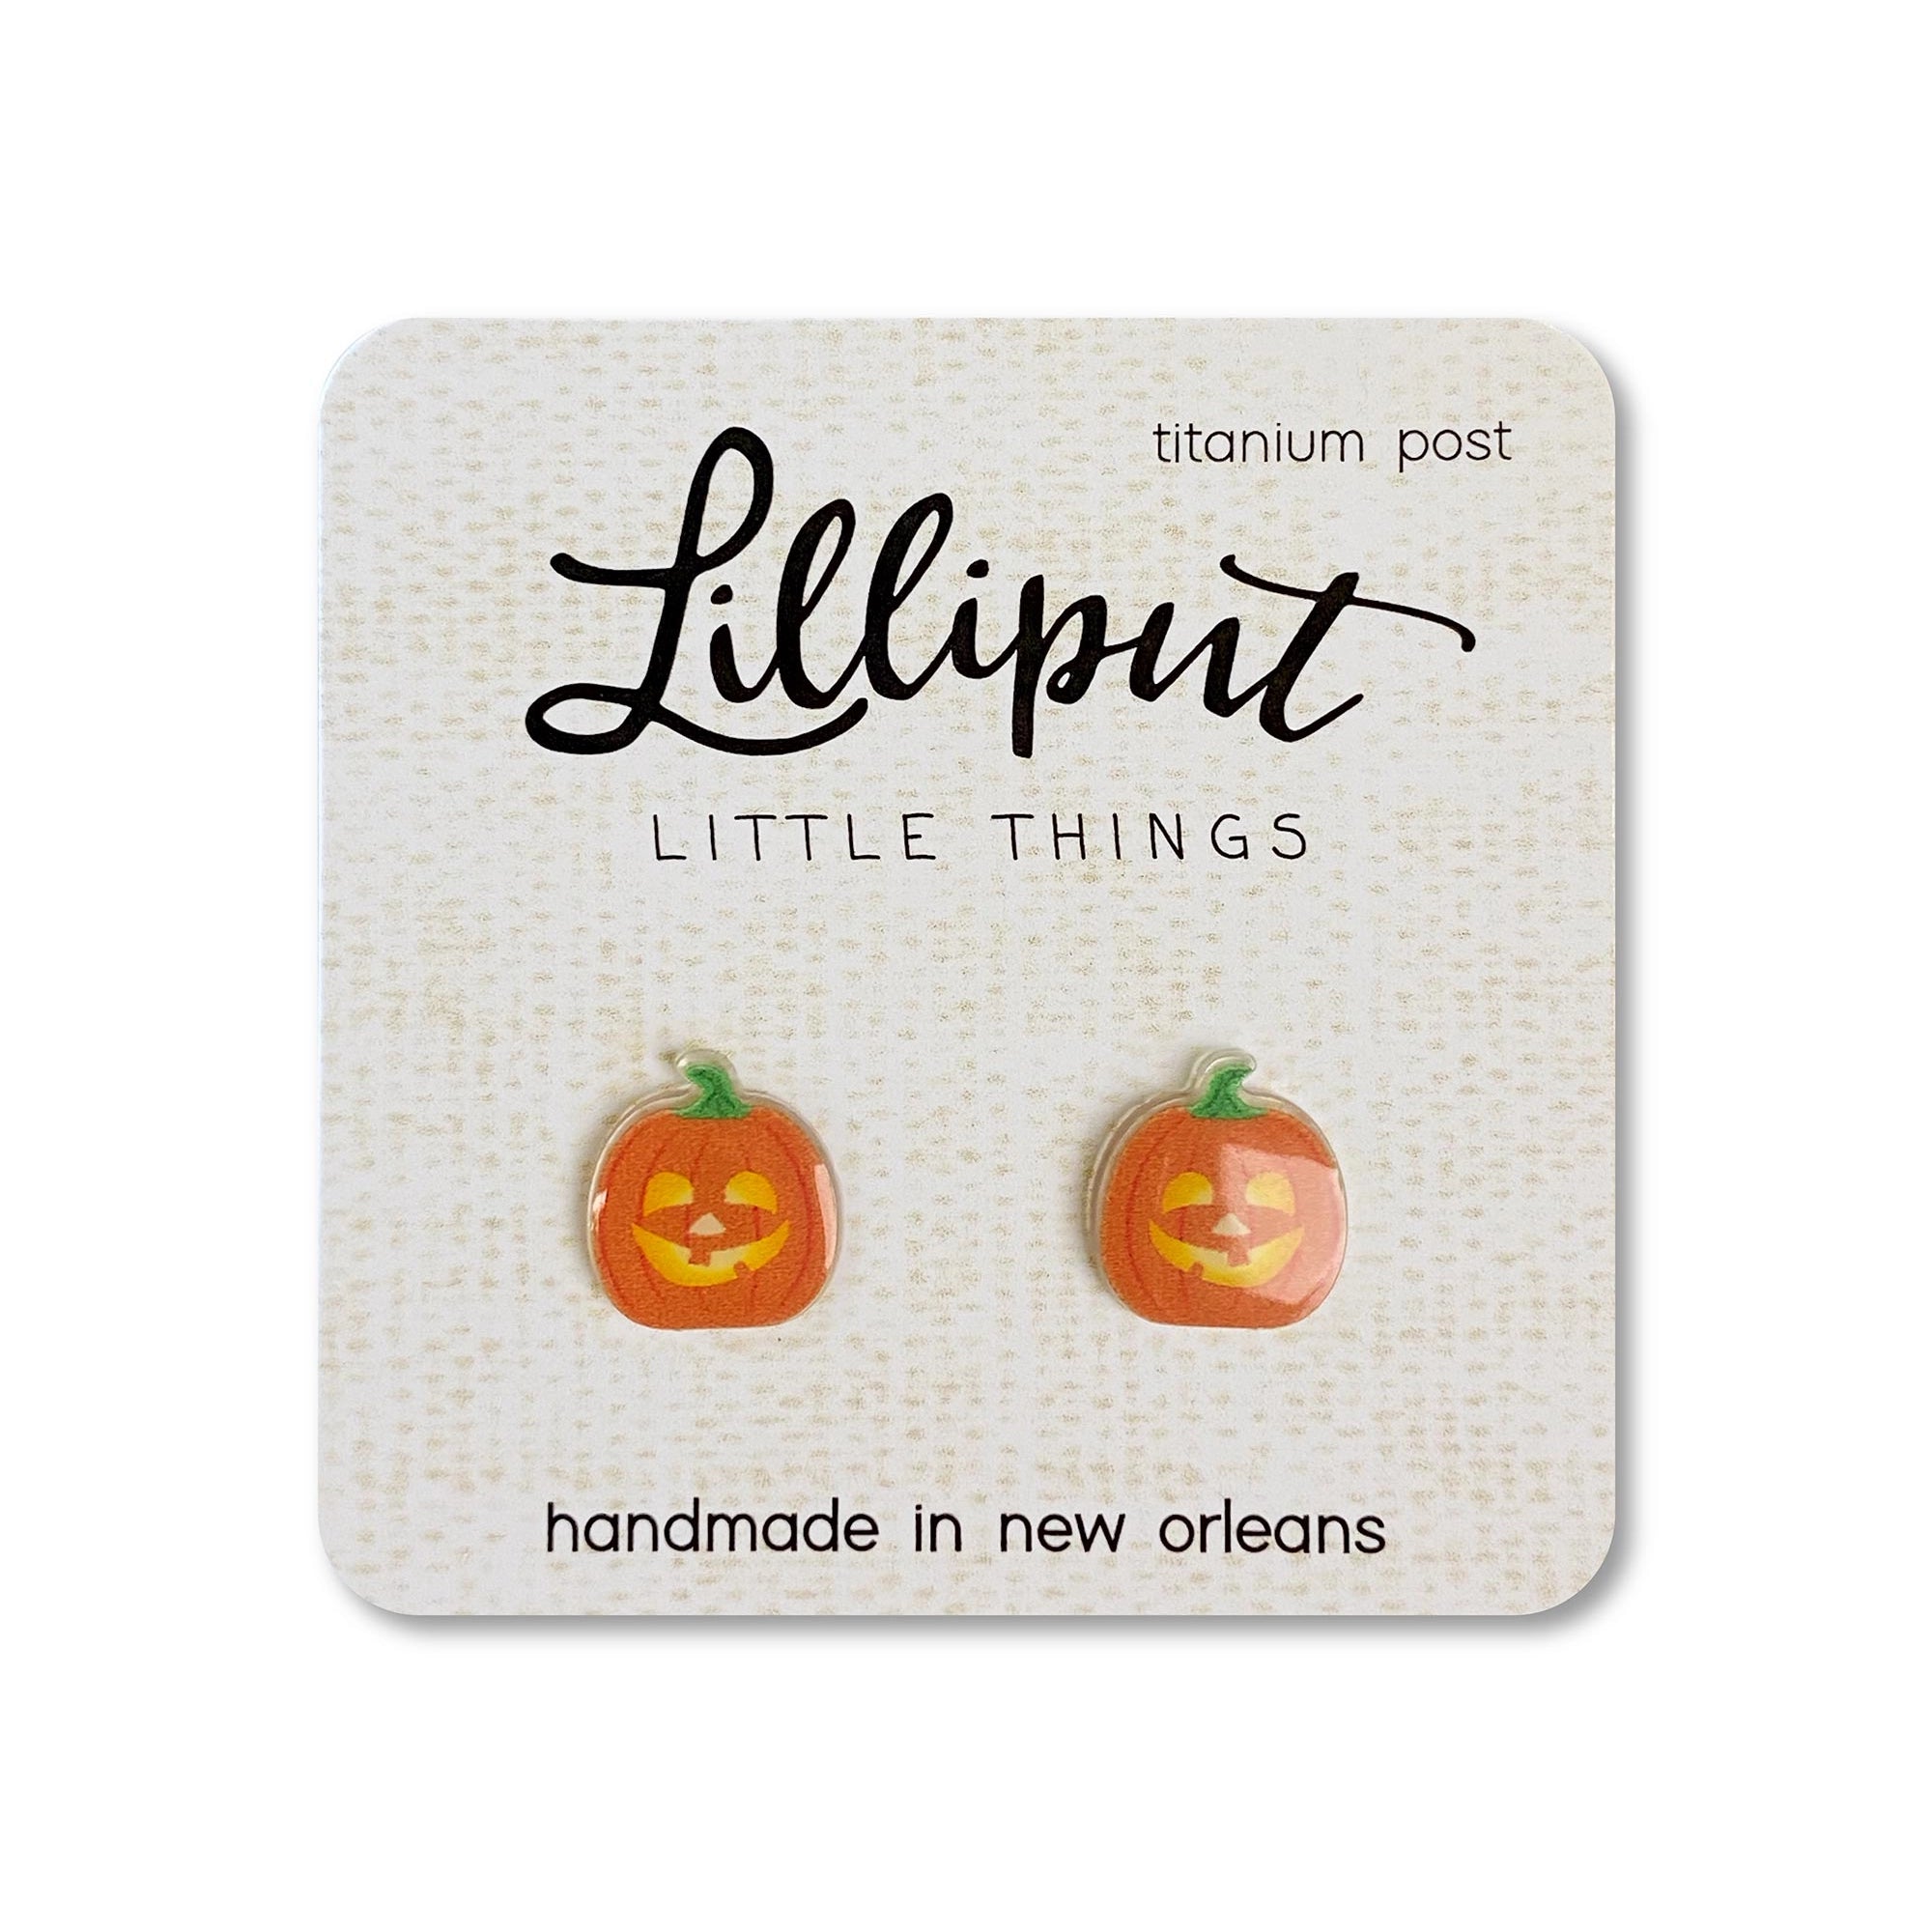 Fall/Holiday Kids Earrings Lilliput Little Things 